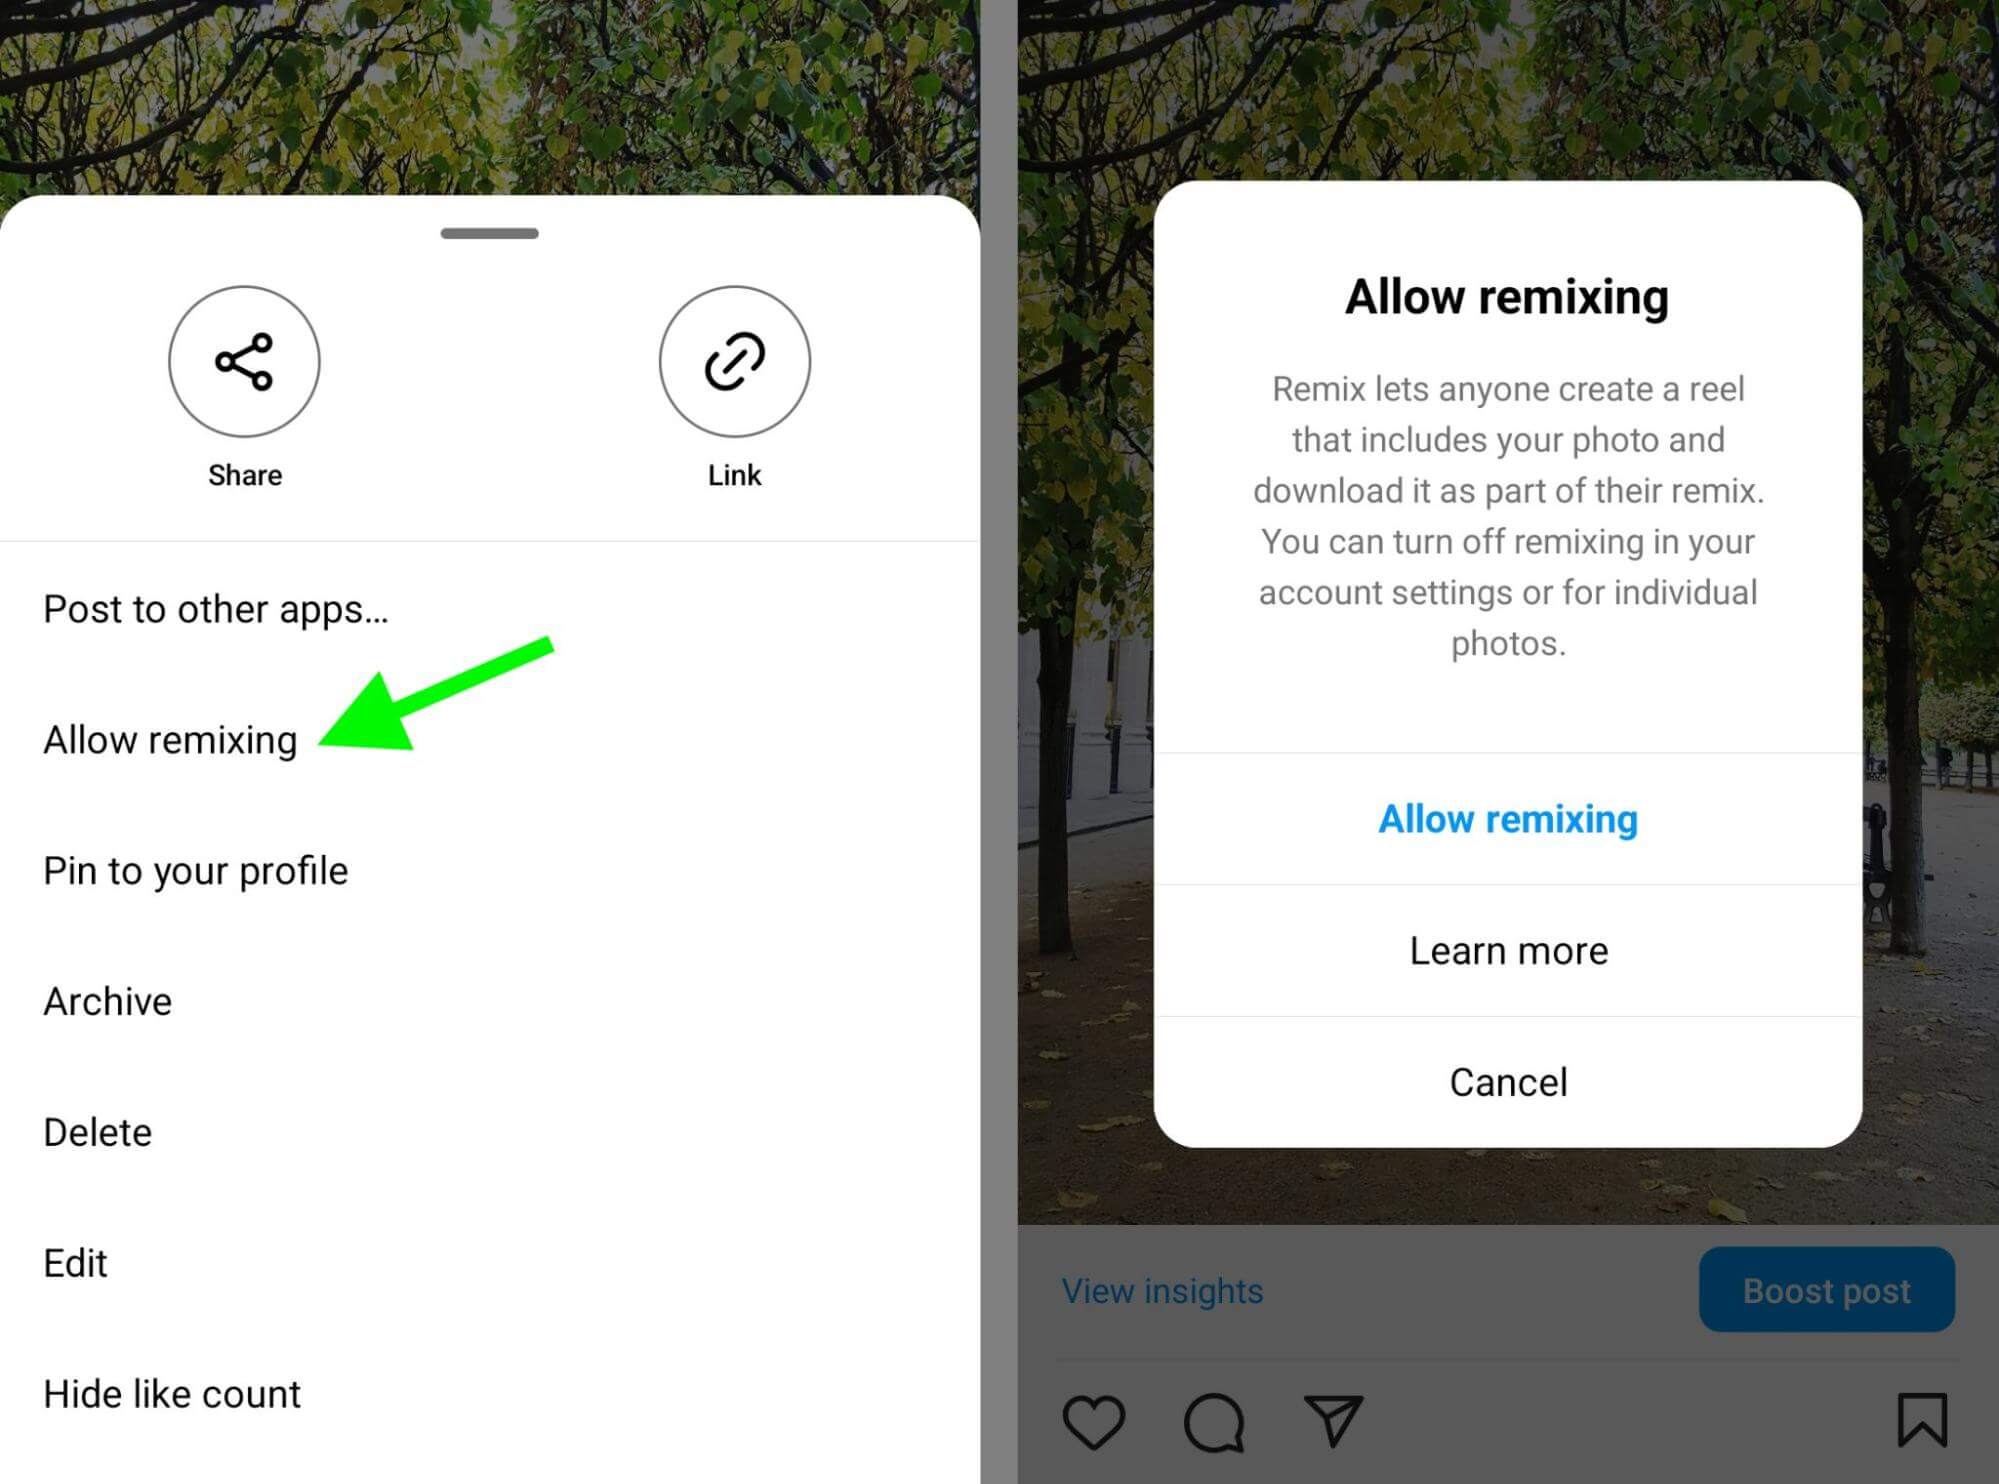 how-to-use-instagram-photo-remix-feature-turn-on-off-trick-into-giving-step-17